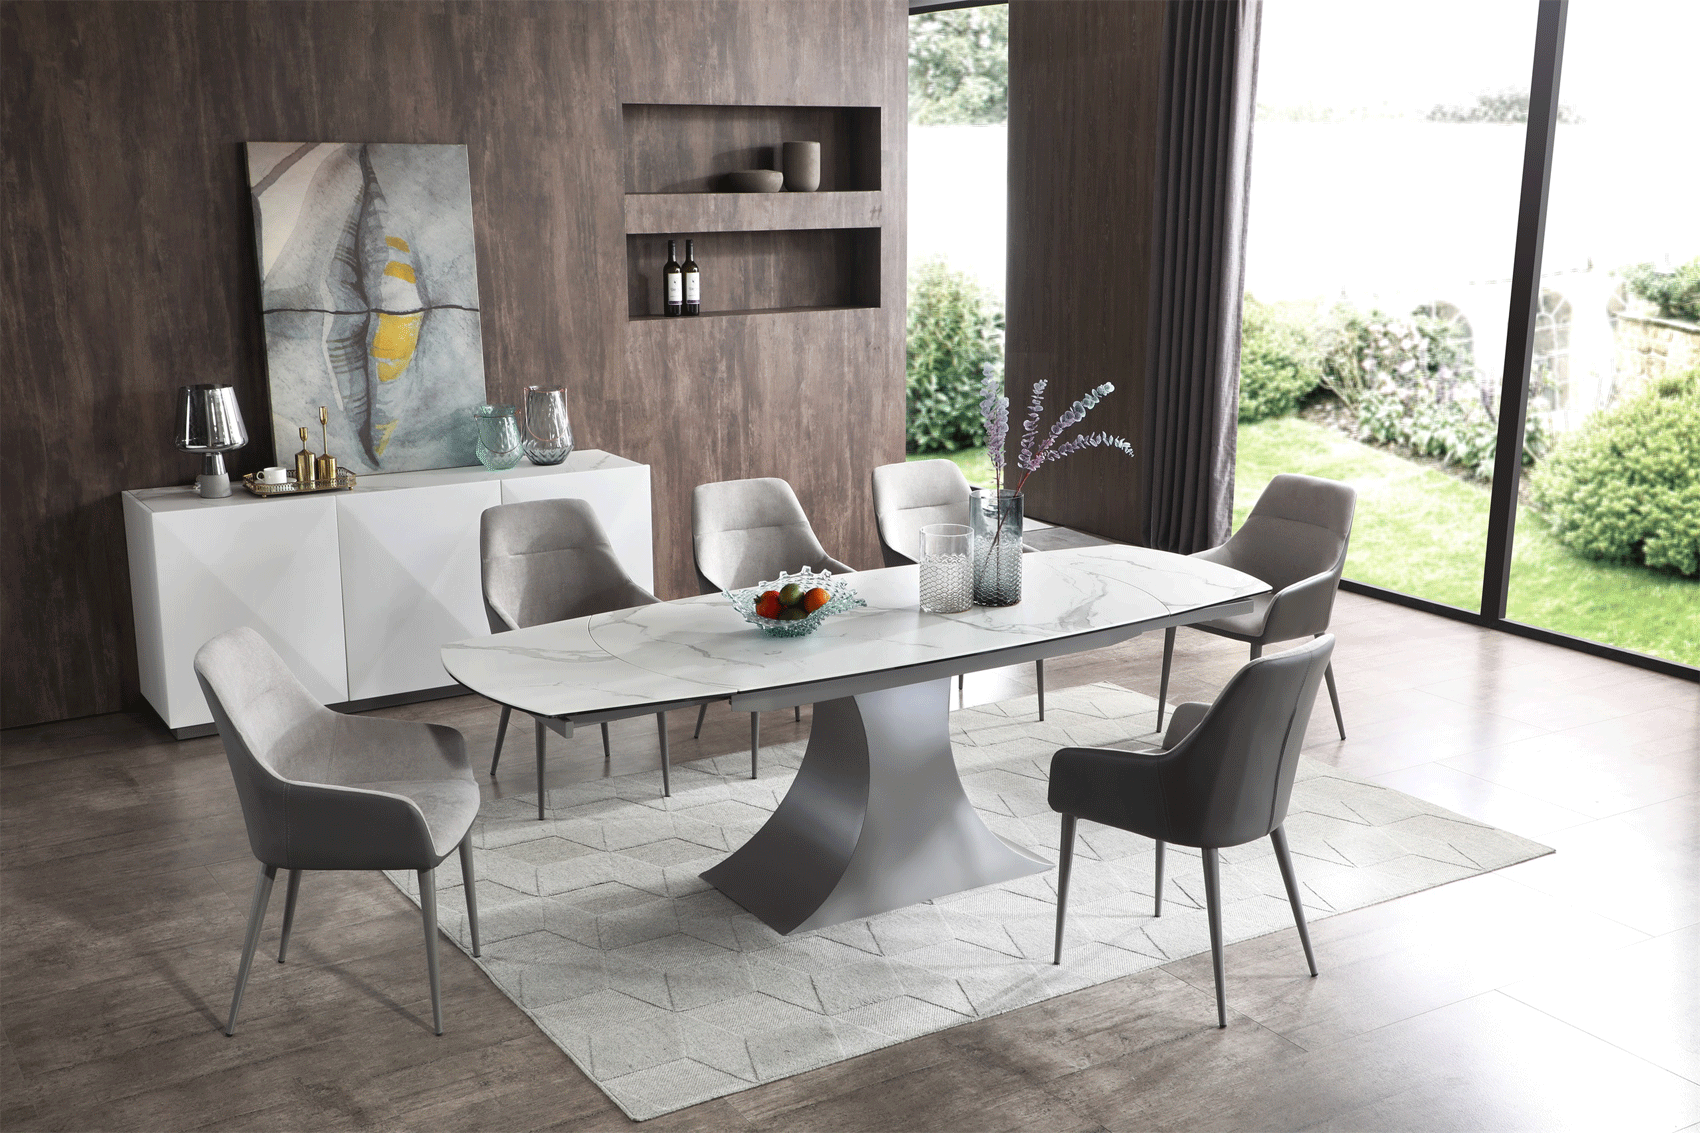 Wallunits Hallway Console tables and Mirrors 9035 Table with 1254 Chairs and 3012 buffet